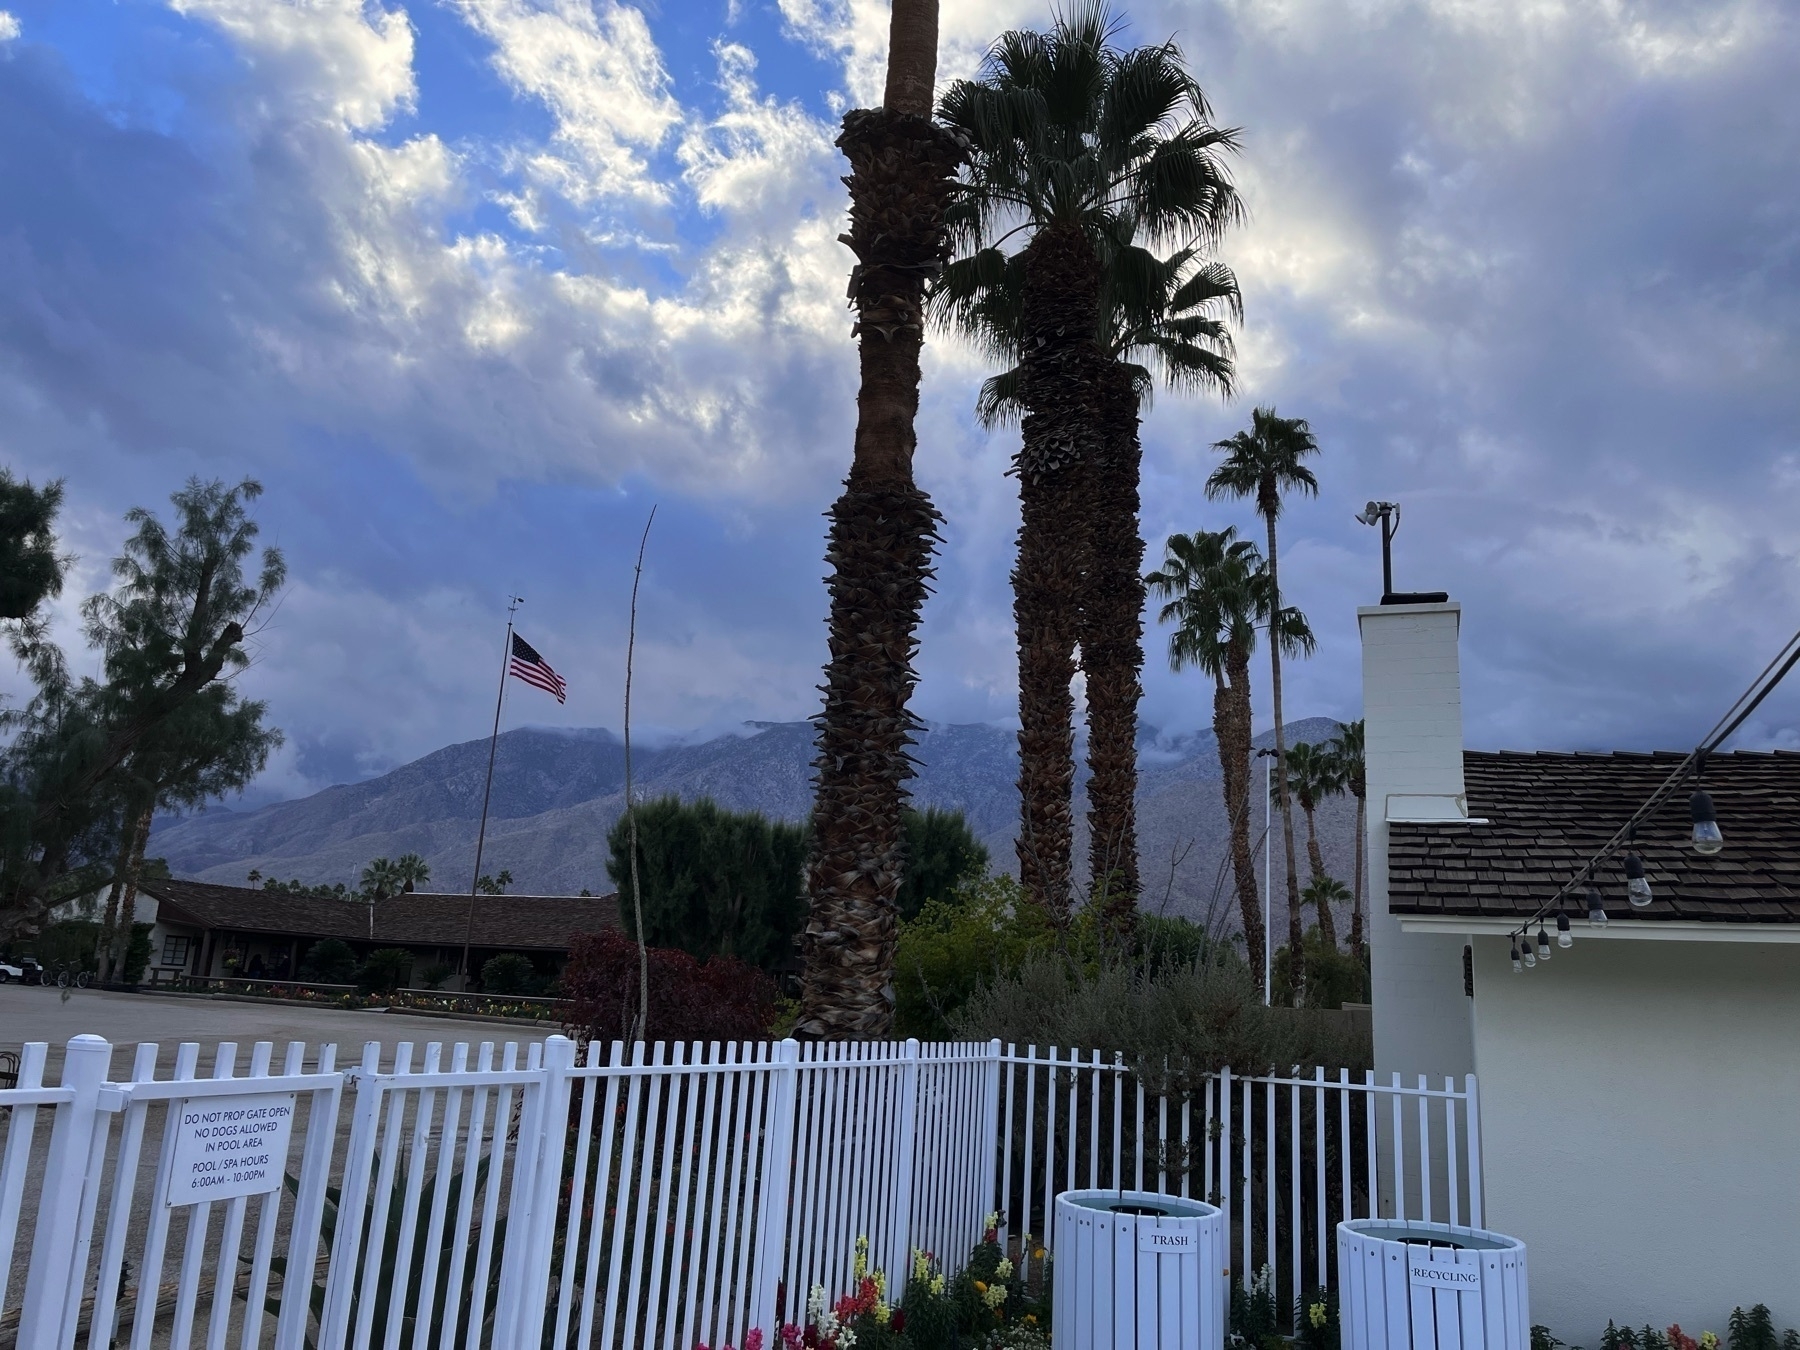 Photo of a white fence, the angle of a low white building with a peaked roof and string lights coming off it. Several massive palm trees stand behind the building. In the distance are smokey mountains. The sky is bright and cloudy.